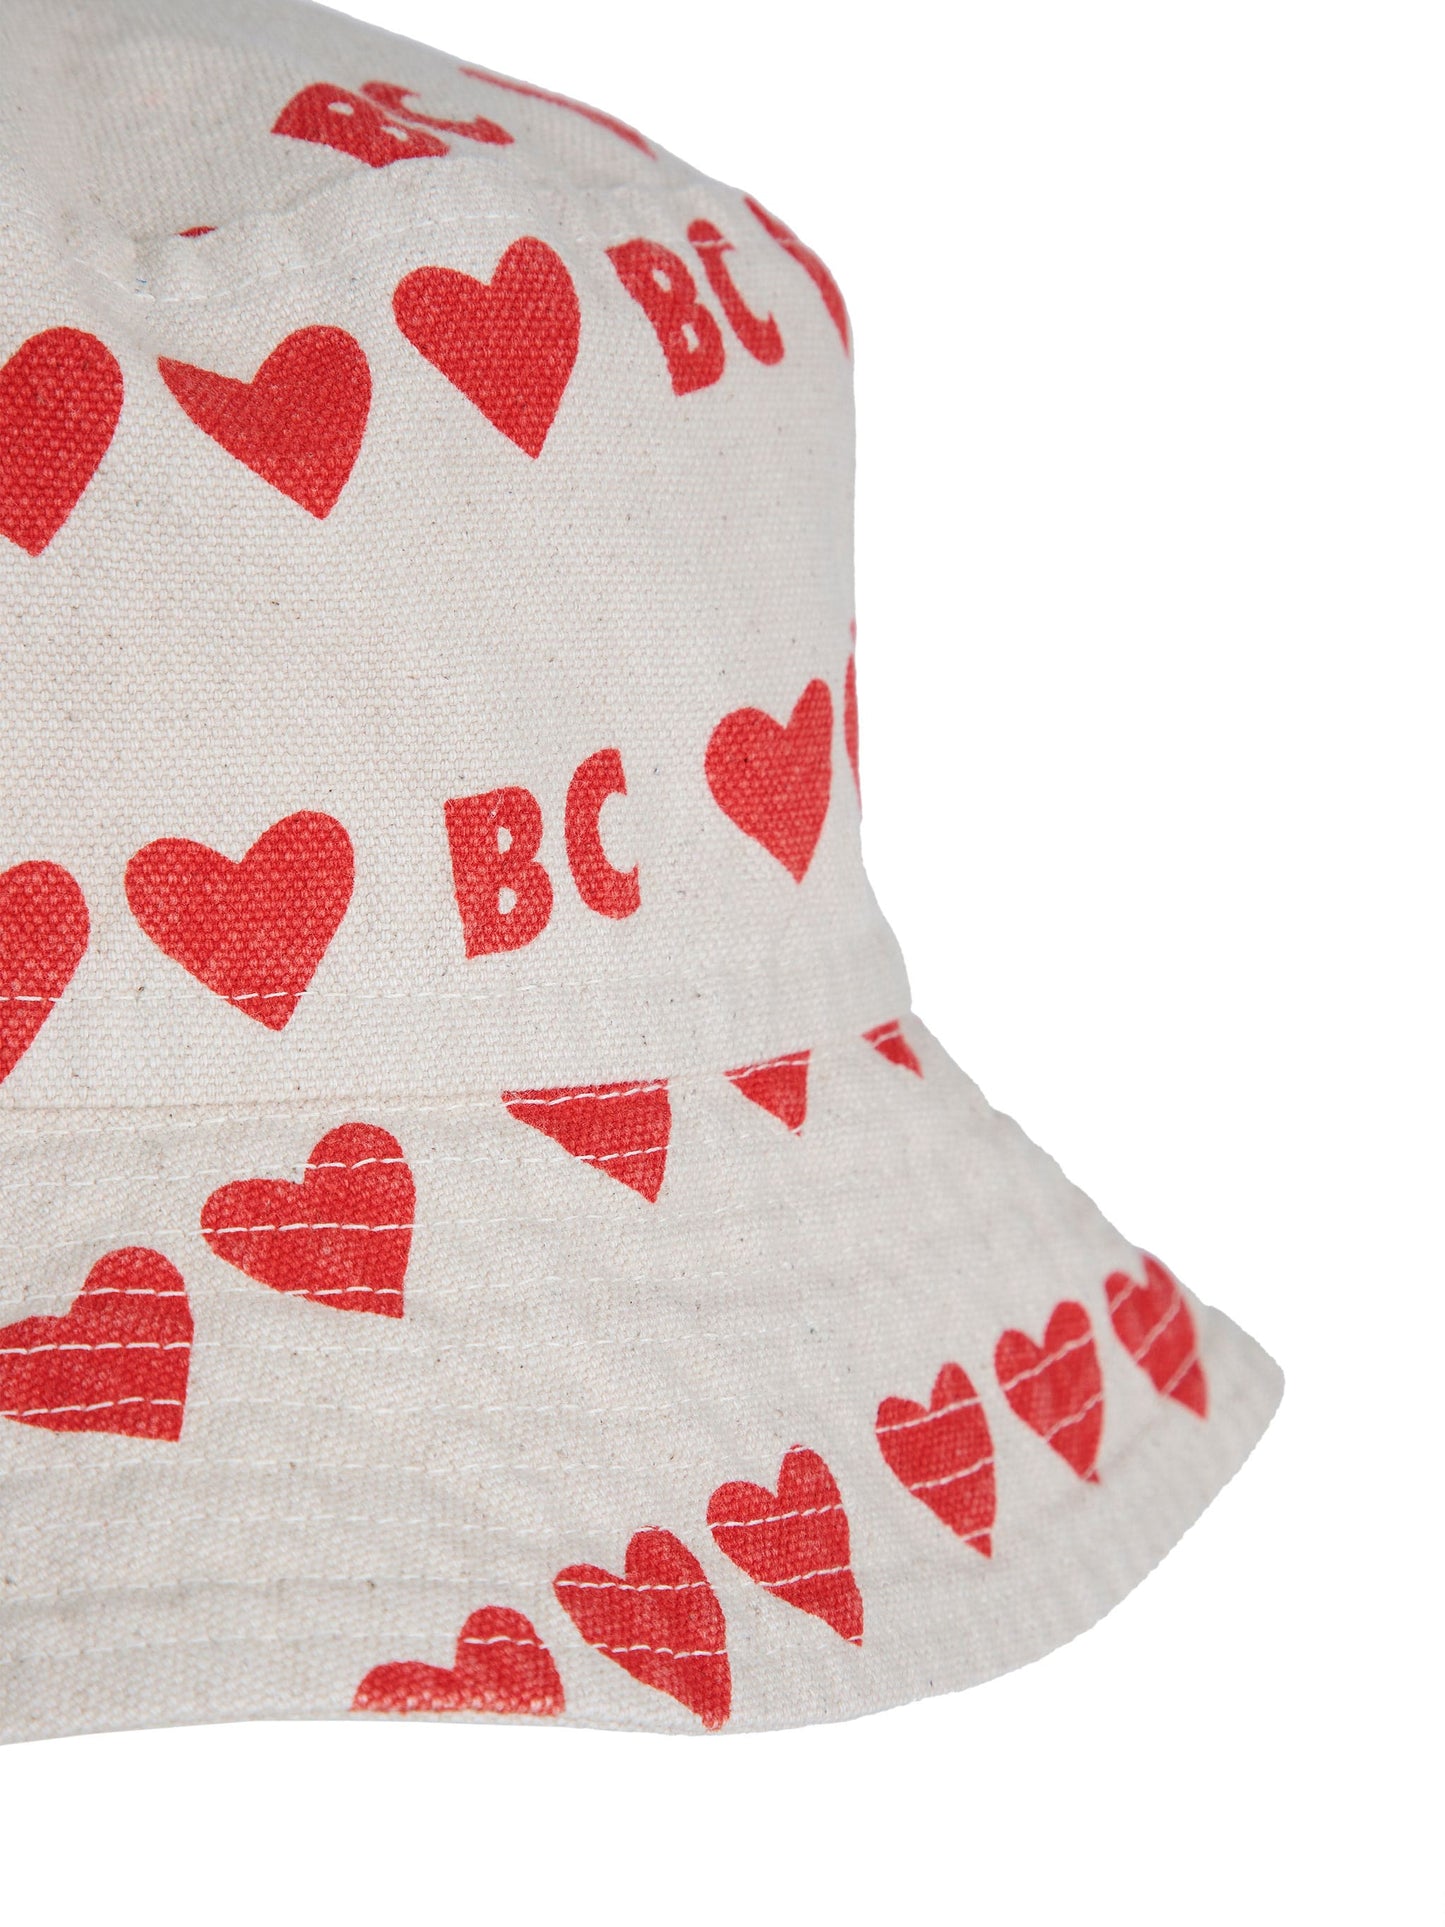 BC hearts all over hat